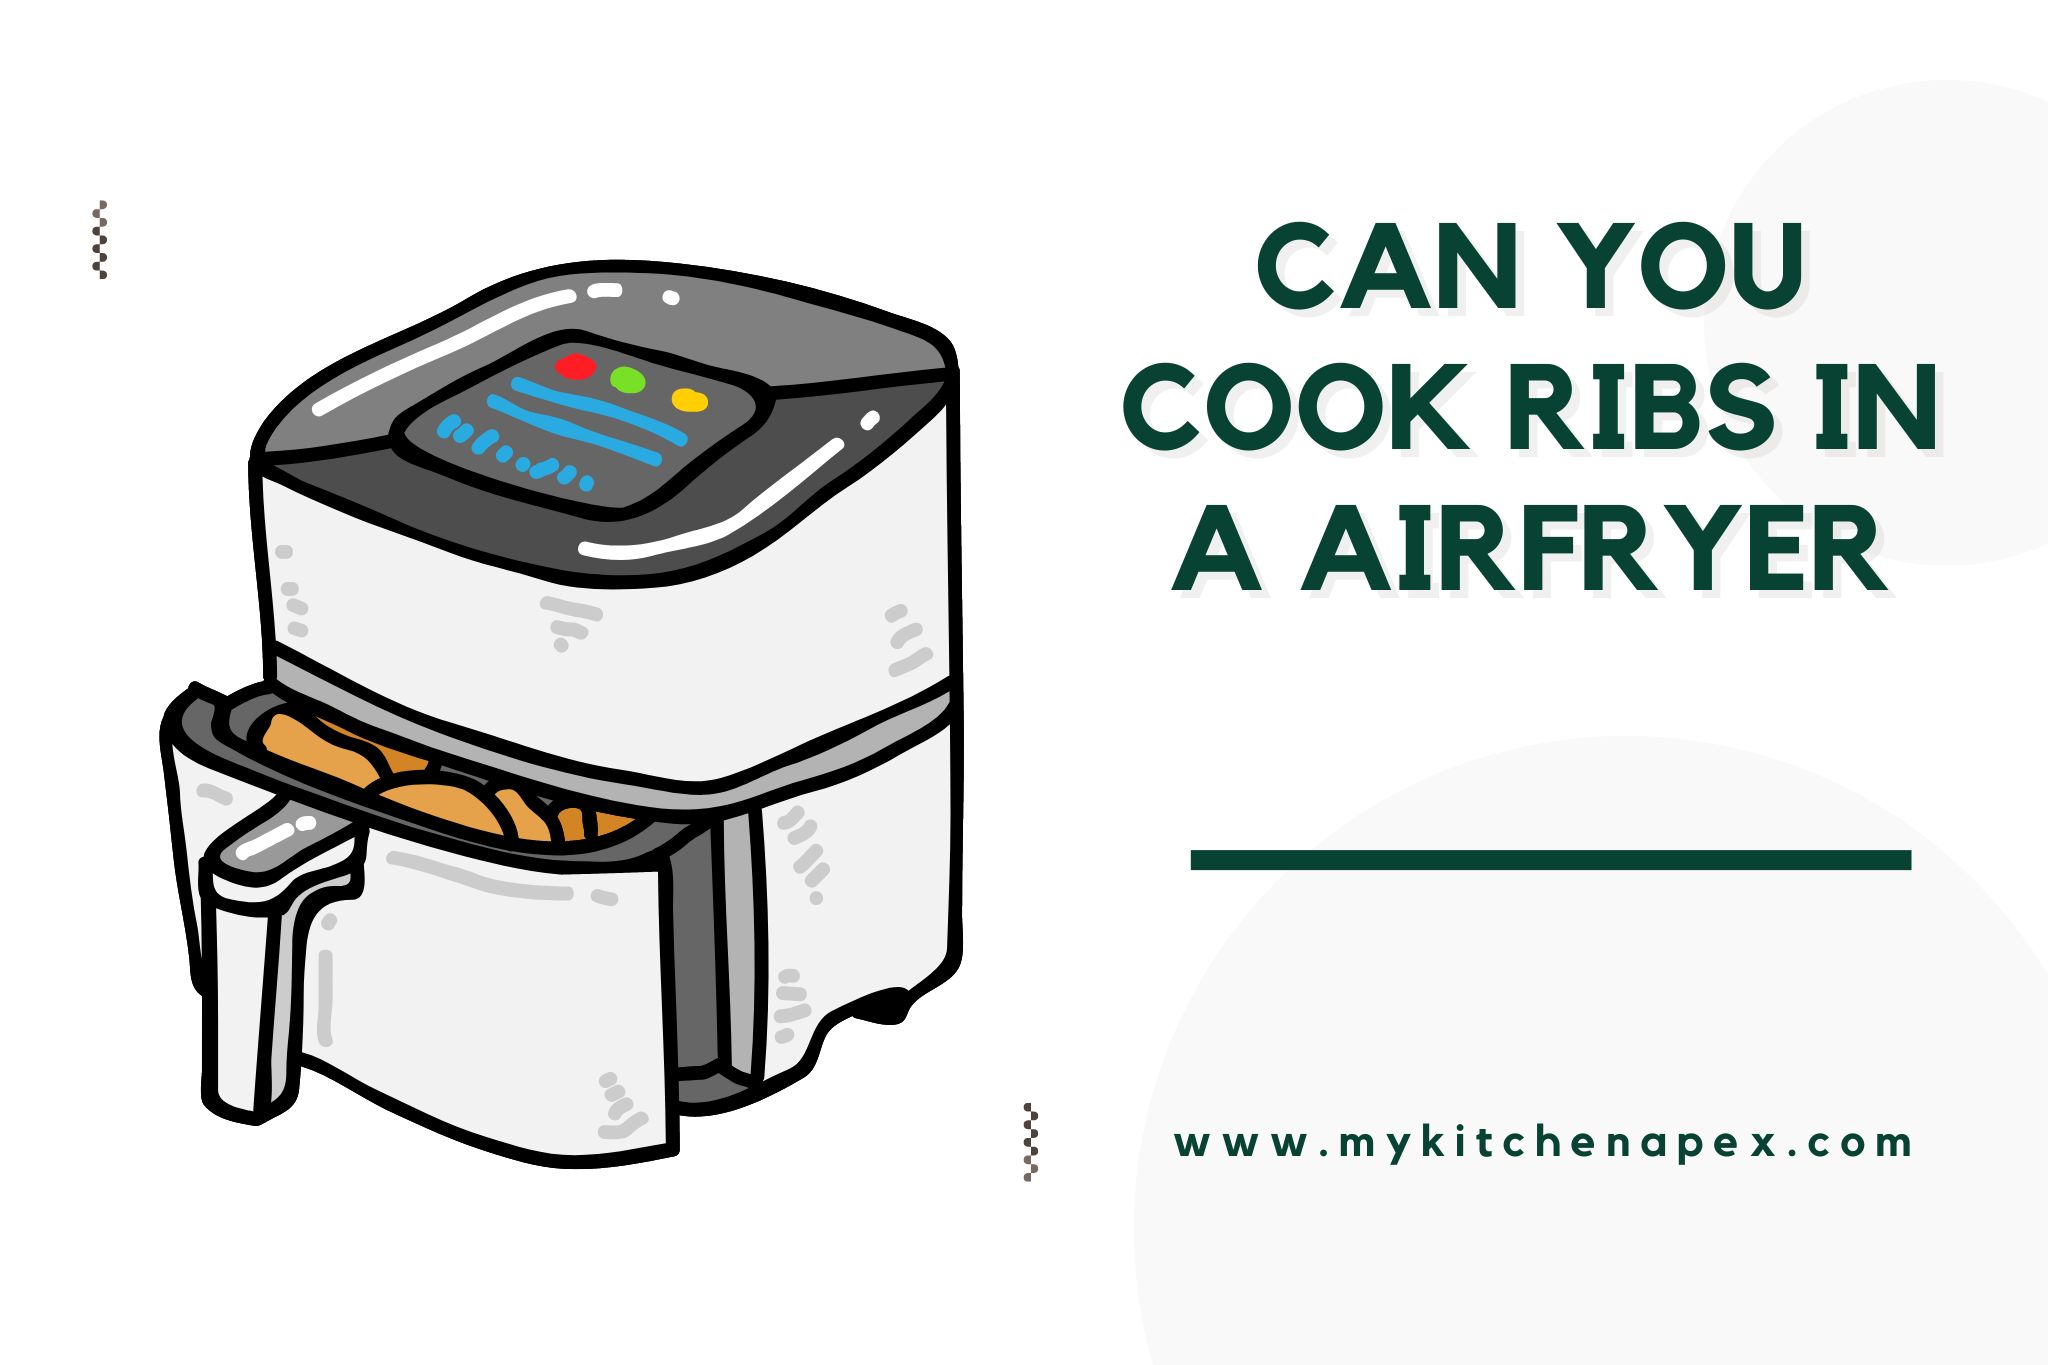 can you cook ribs in a airfryer